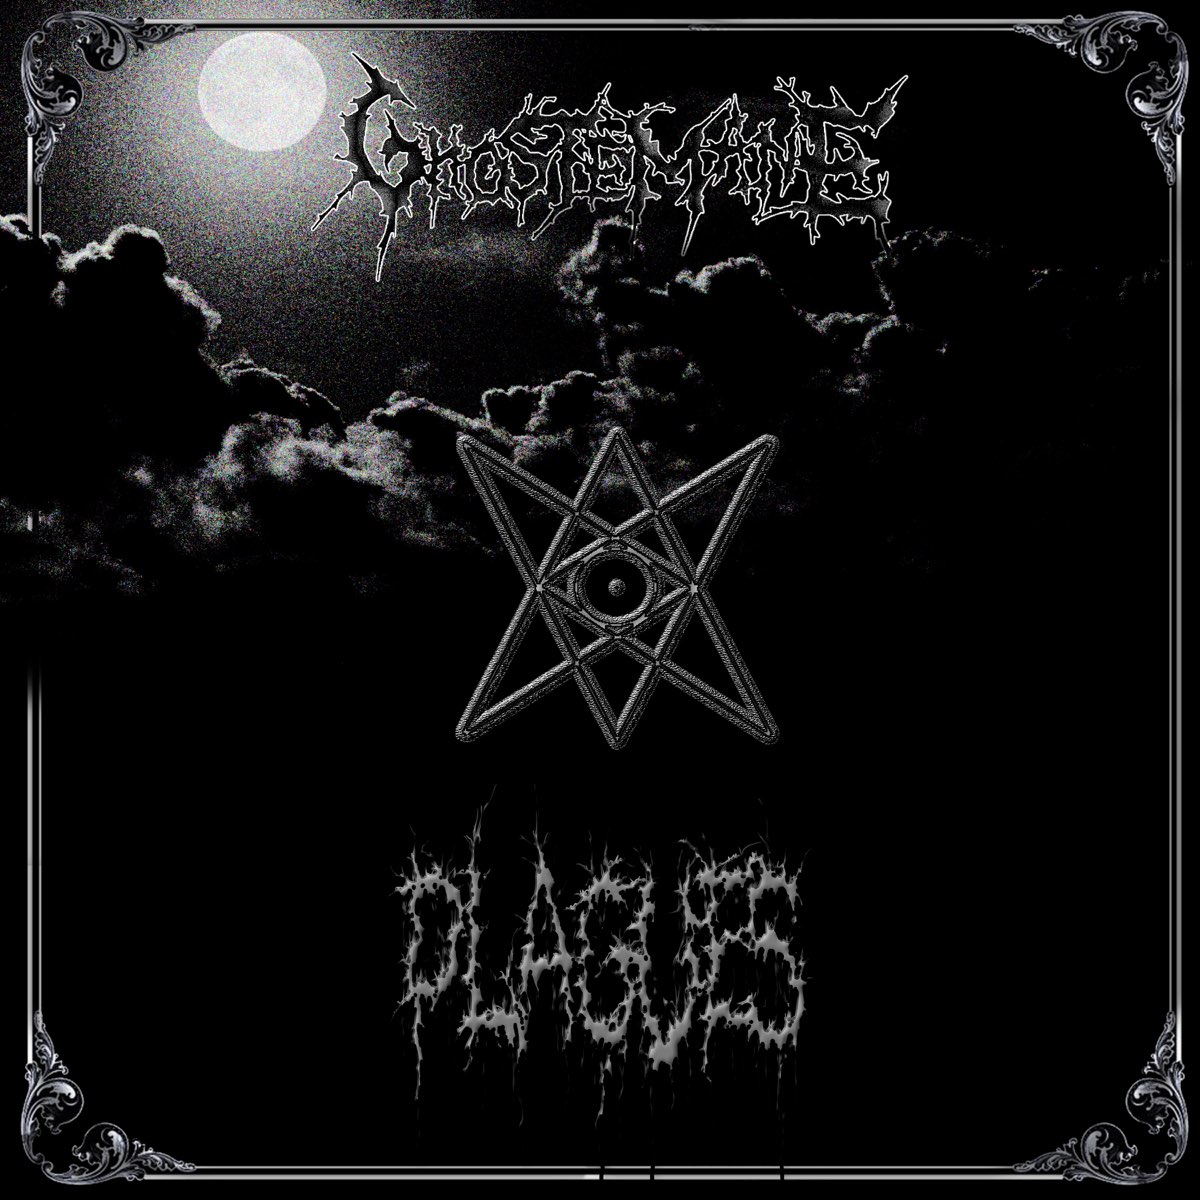 Plagues by Ghostemane on Apple Music